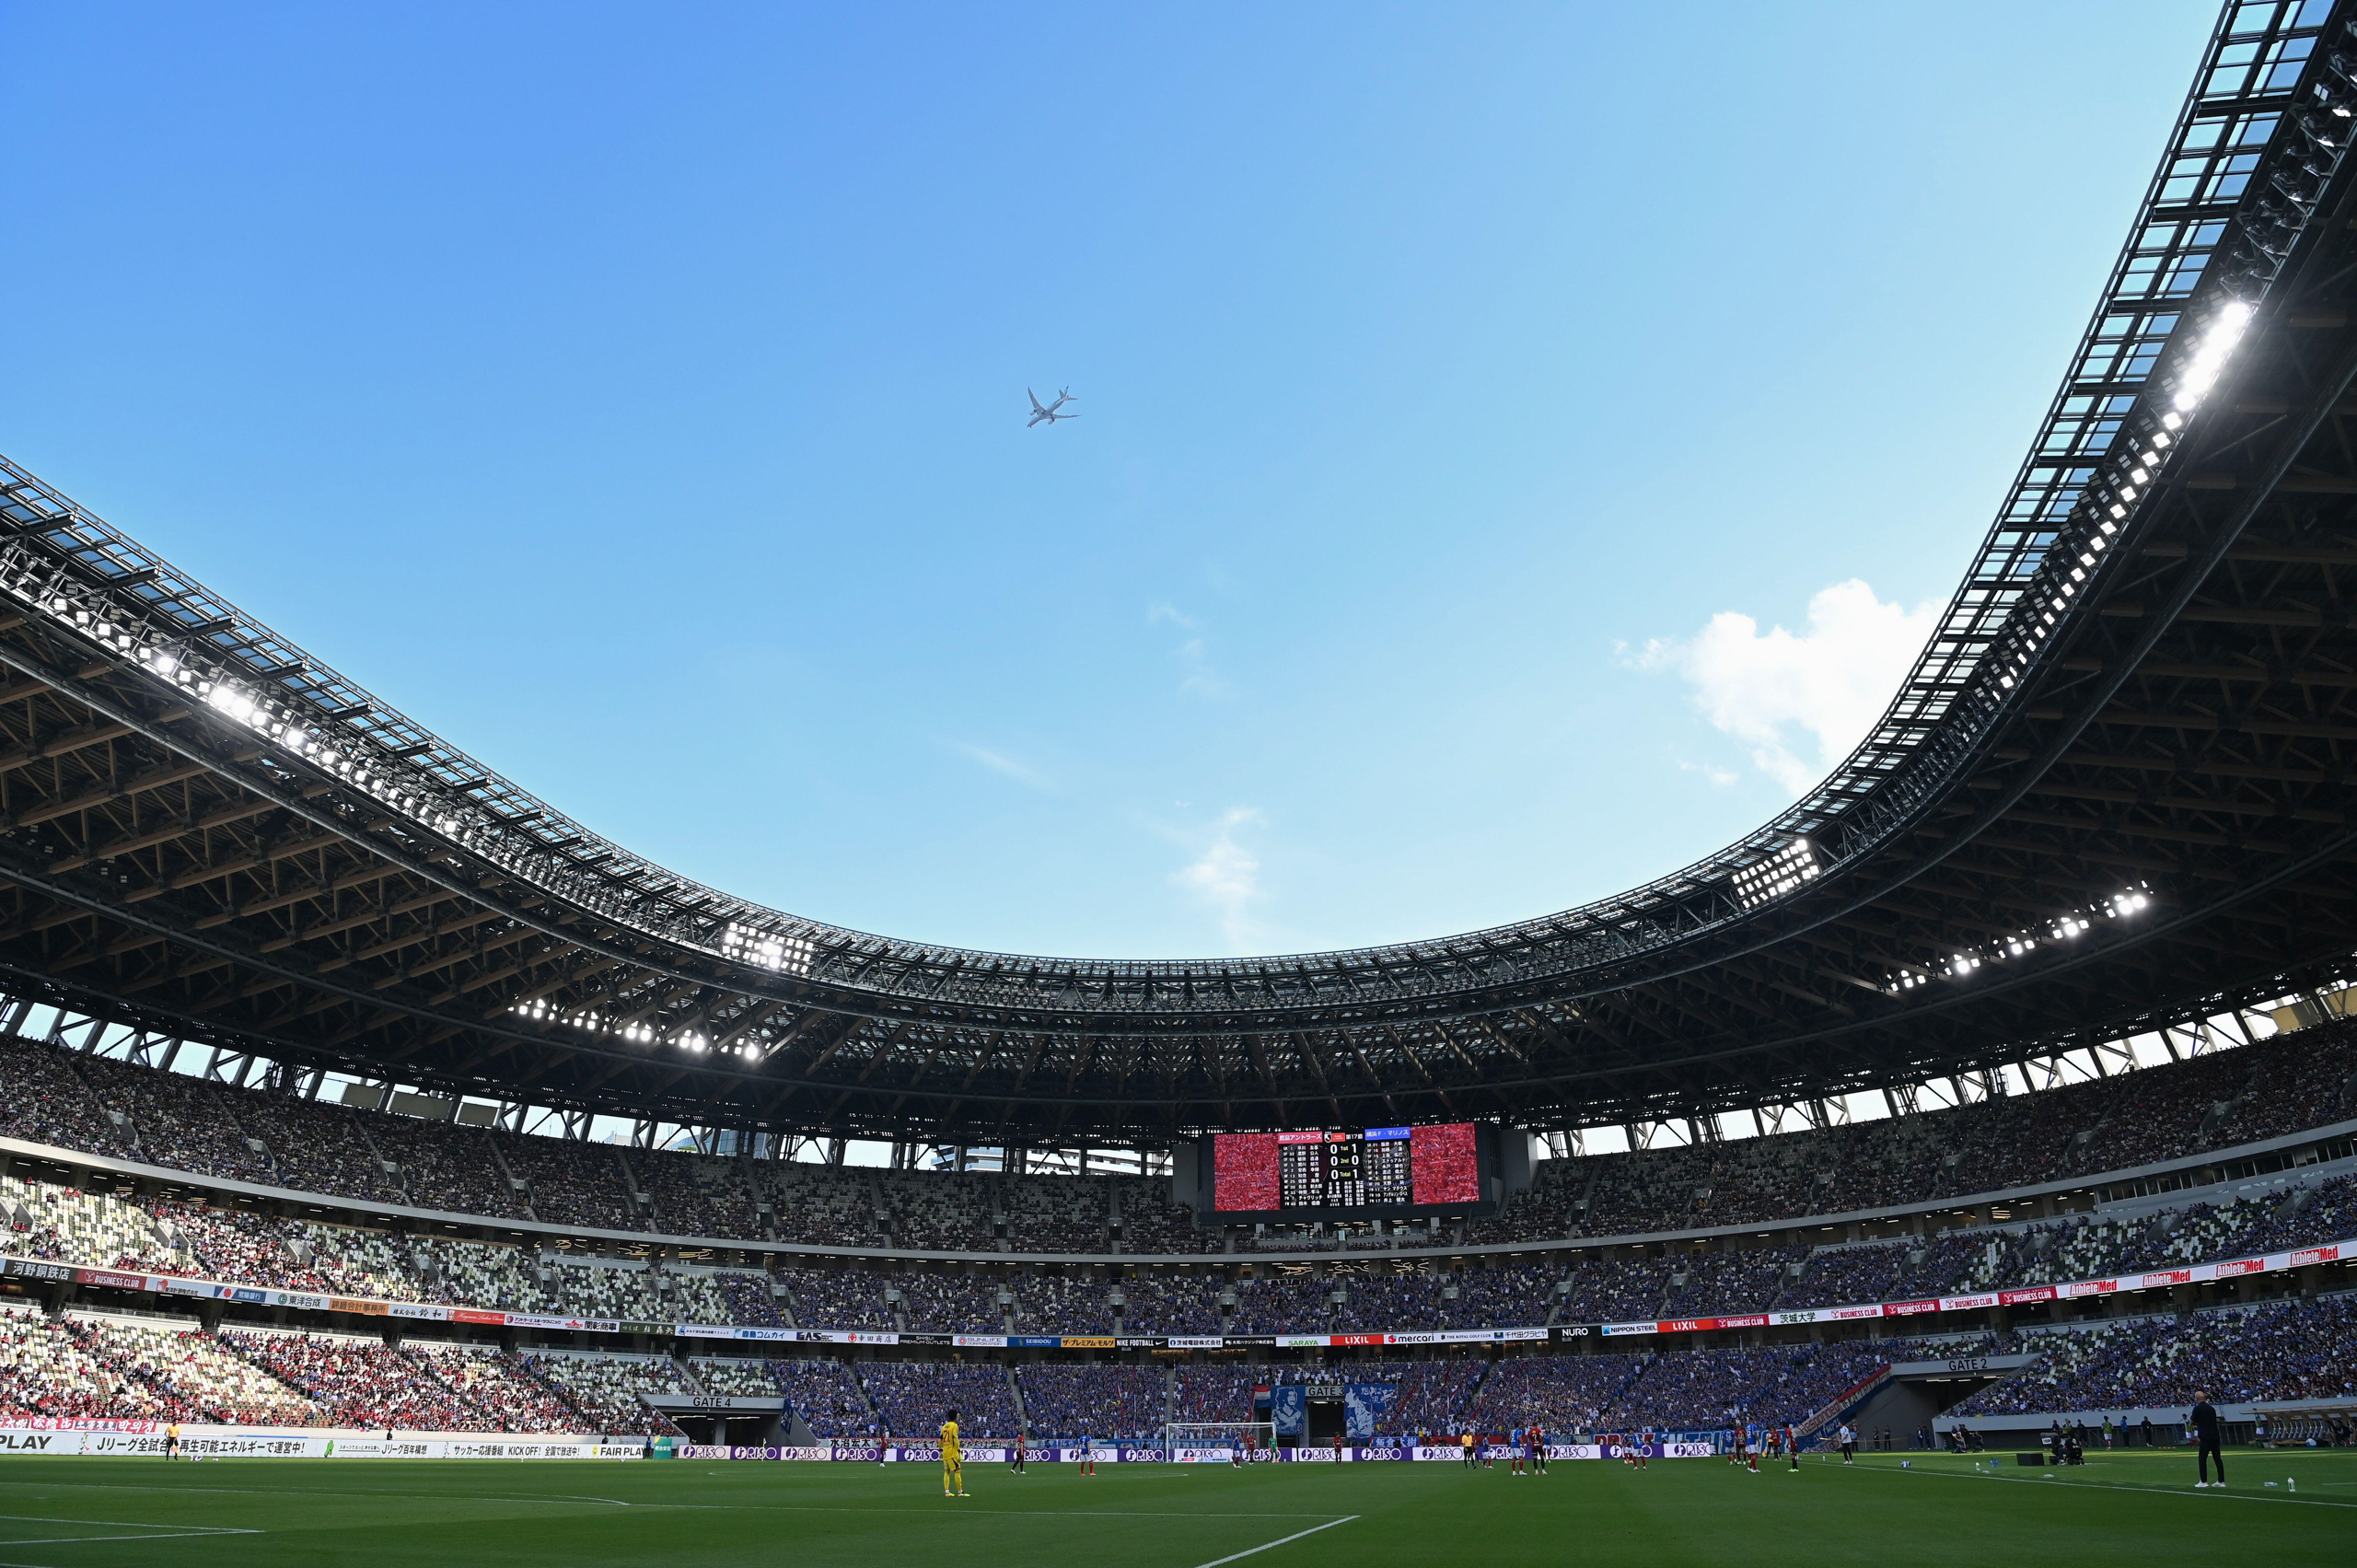 <p>A plane flies over a football match at the Japan National Stadium, the primary venue for the 2020 Tokyo Olympics. The upcoming UEFA Euro 2024 football tournament and Paris Olympics have both pledged to be greener than previous iterations (Image: Alamy)</p>